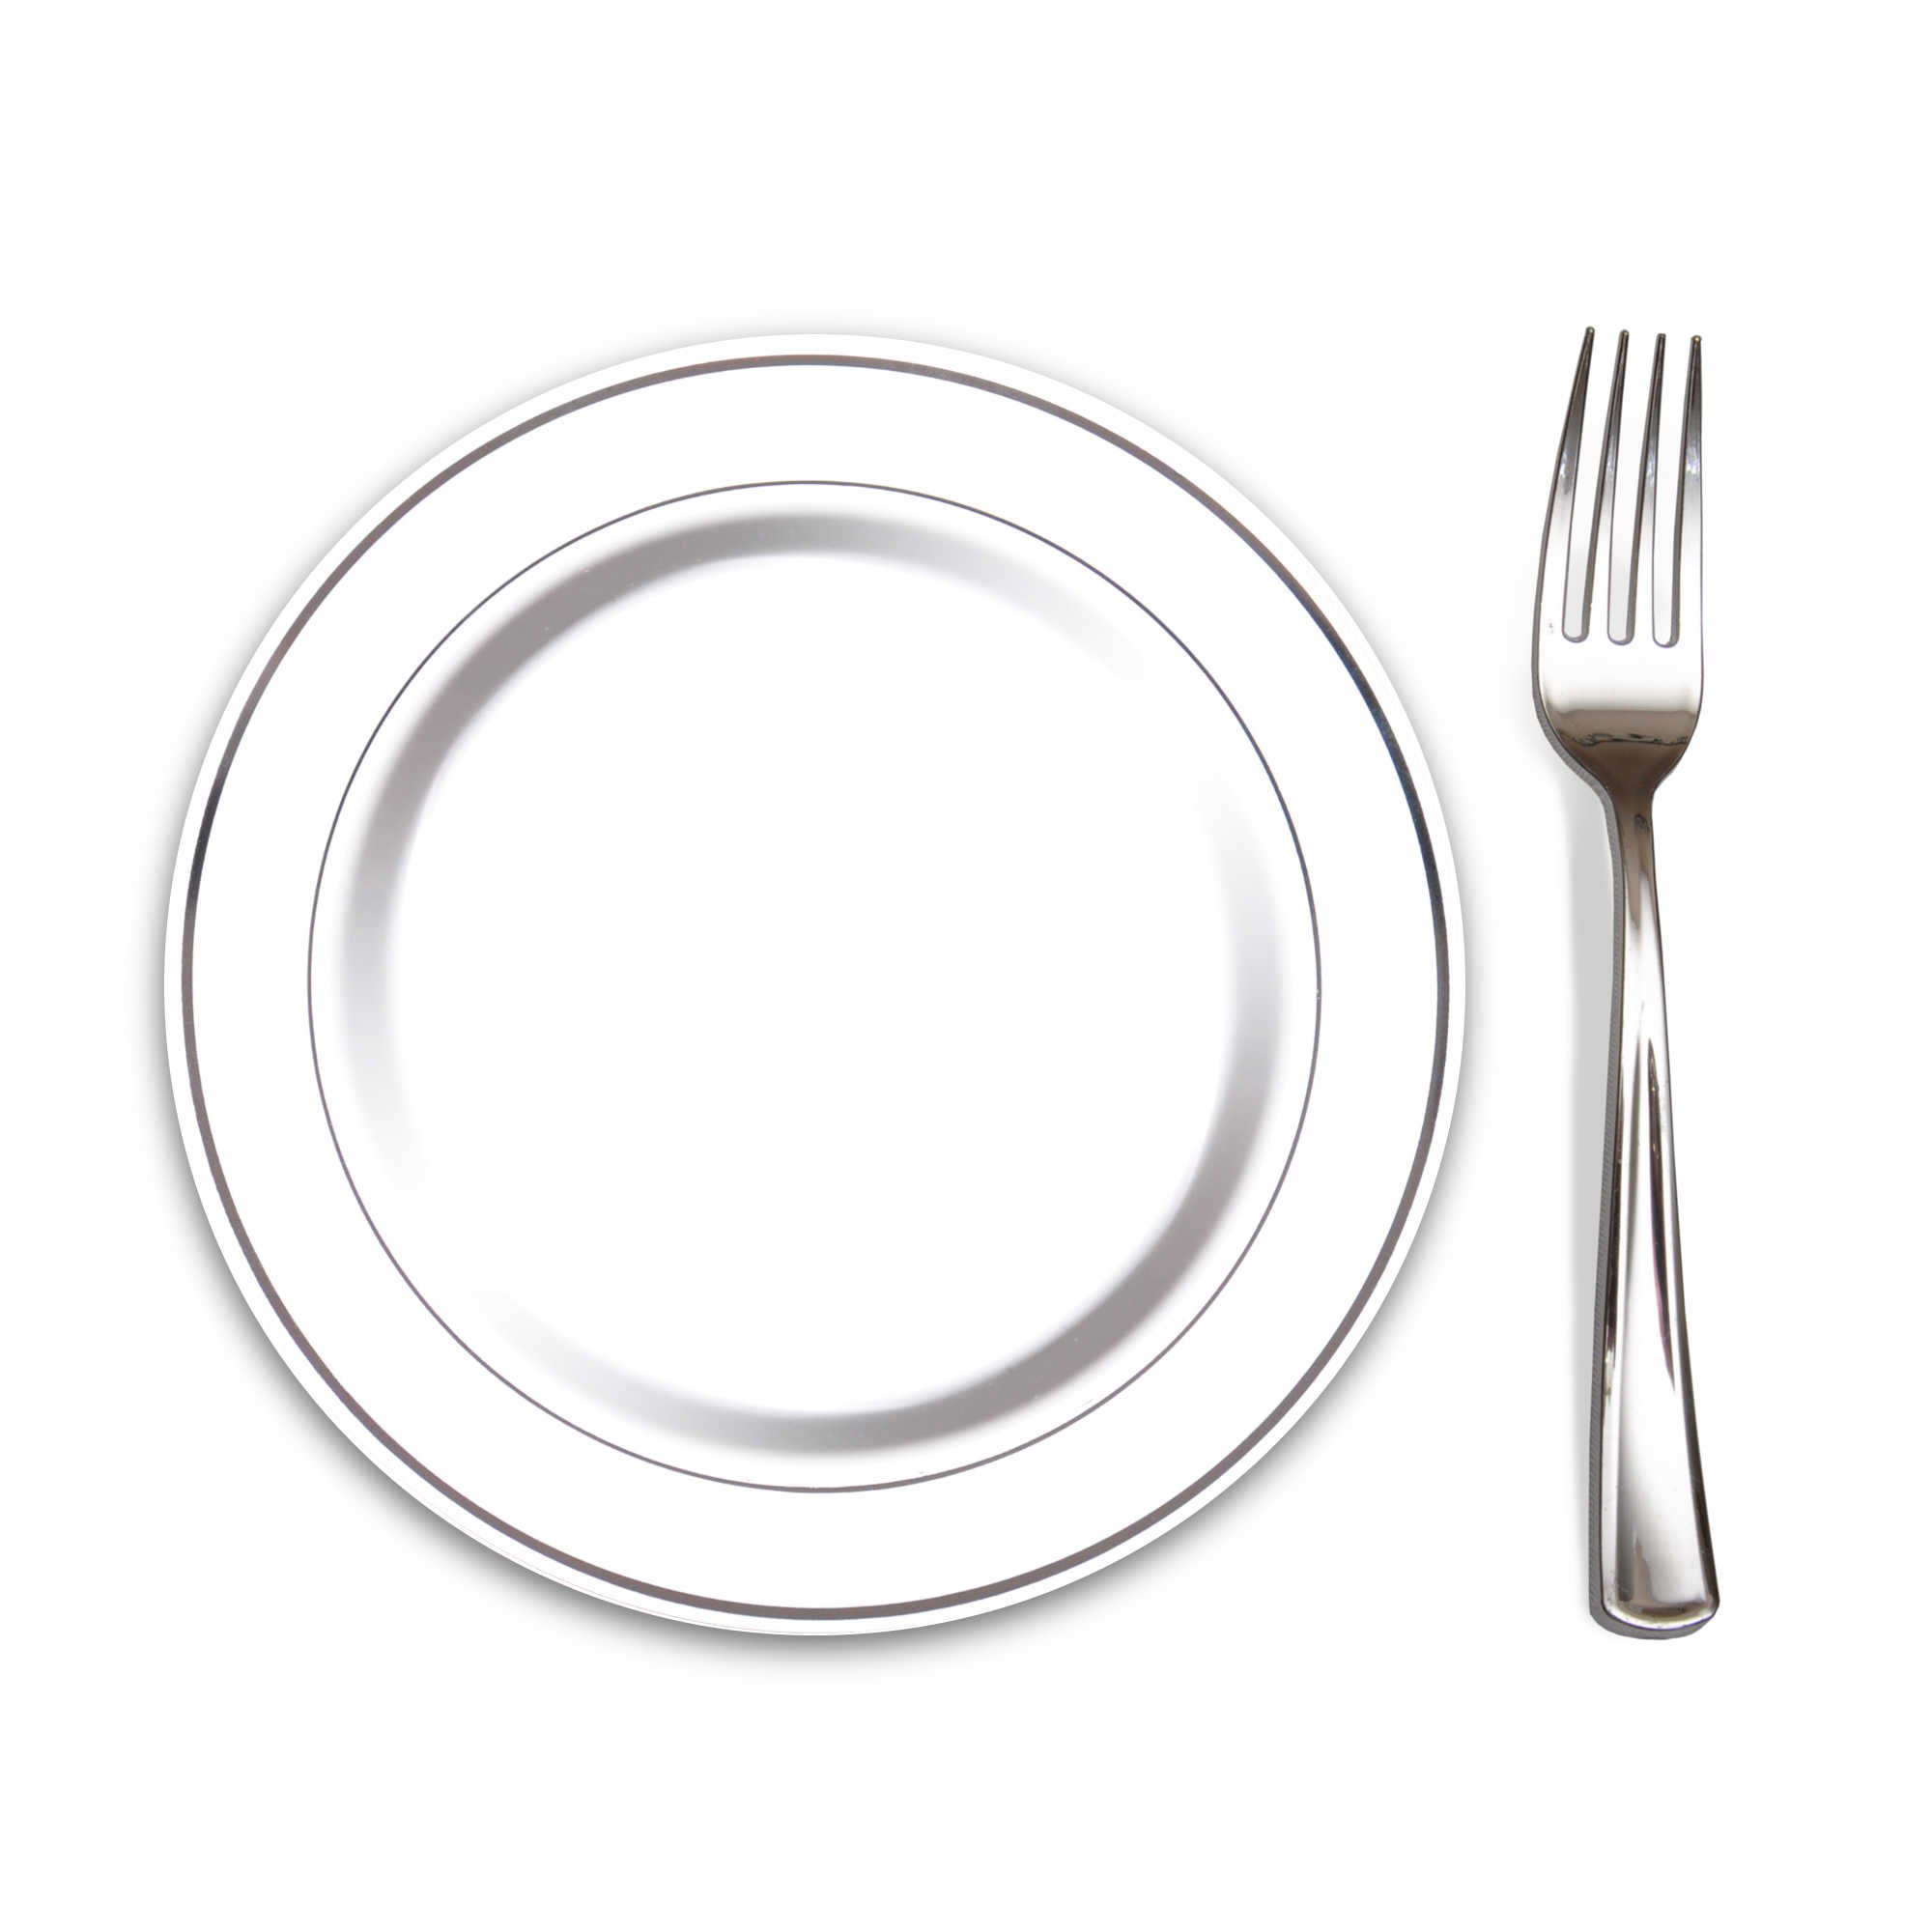 dishes clipart plate cutlery